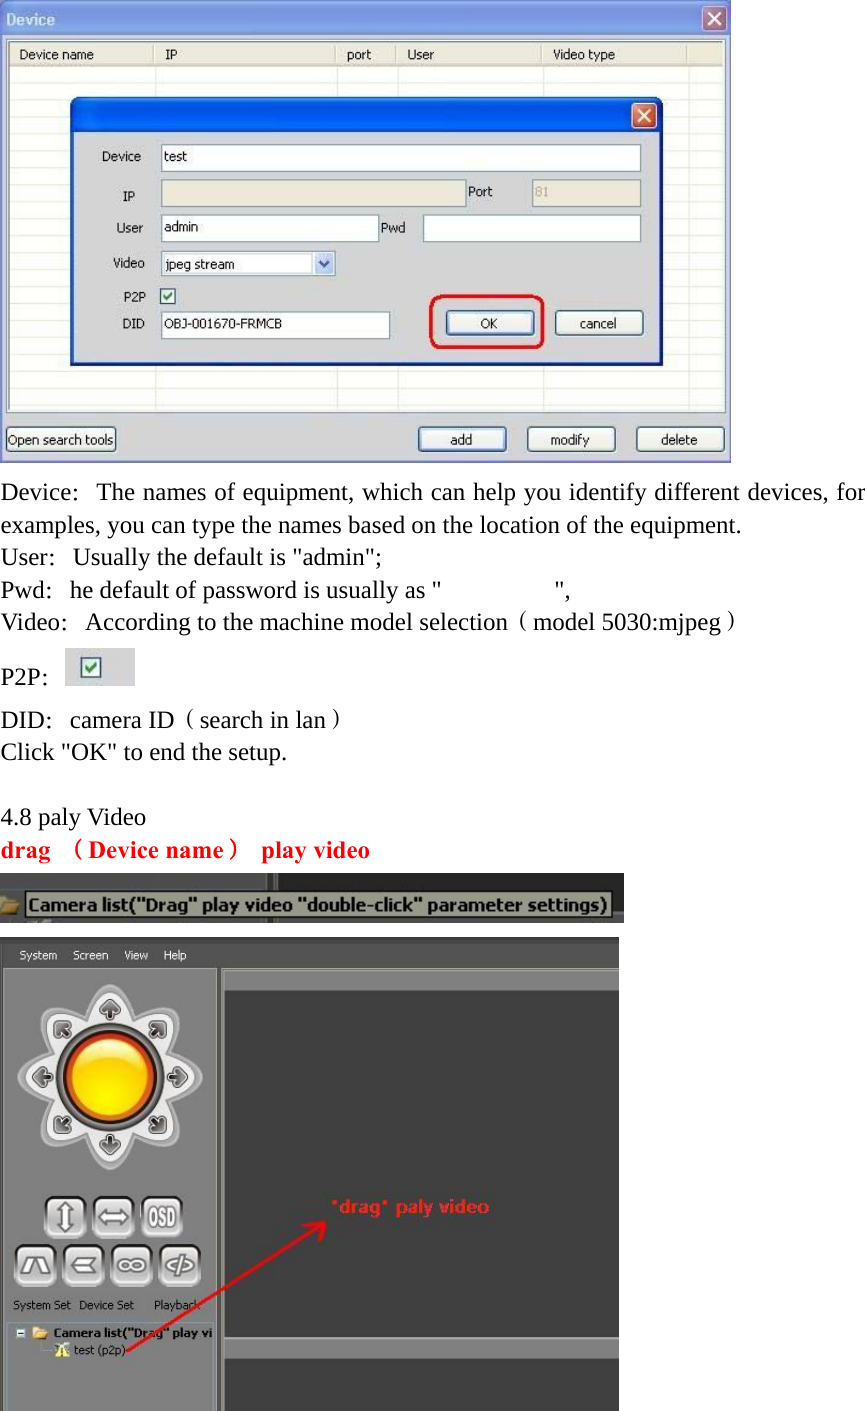    Device：The names of equipment, which can help you identify different devices, for examples, you can type the names based on the location of the equipment. User：Usually the default is &quot;admin&quot;; Pwd：he default of password is usually as &quot;         &quot;, Video：According to the machine model selection（model 5030:mjpeg） P2P： DID：camera ID（search in lan） Click &quot;OK&quot; to end the setup.  4.8 paly Video drag  （Device name） play video   